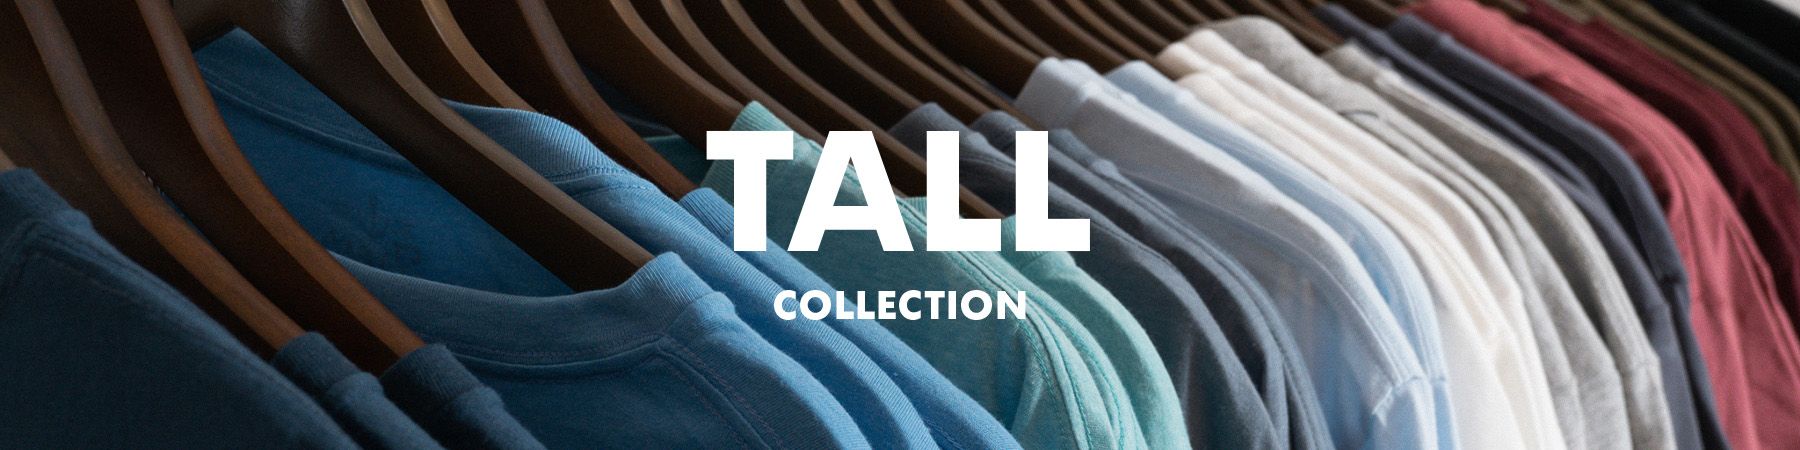 Tall Tees Collection | Fresh Clean Threads